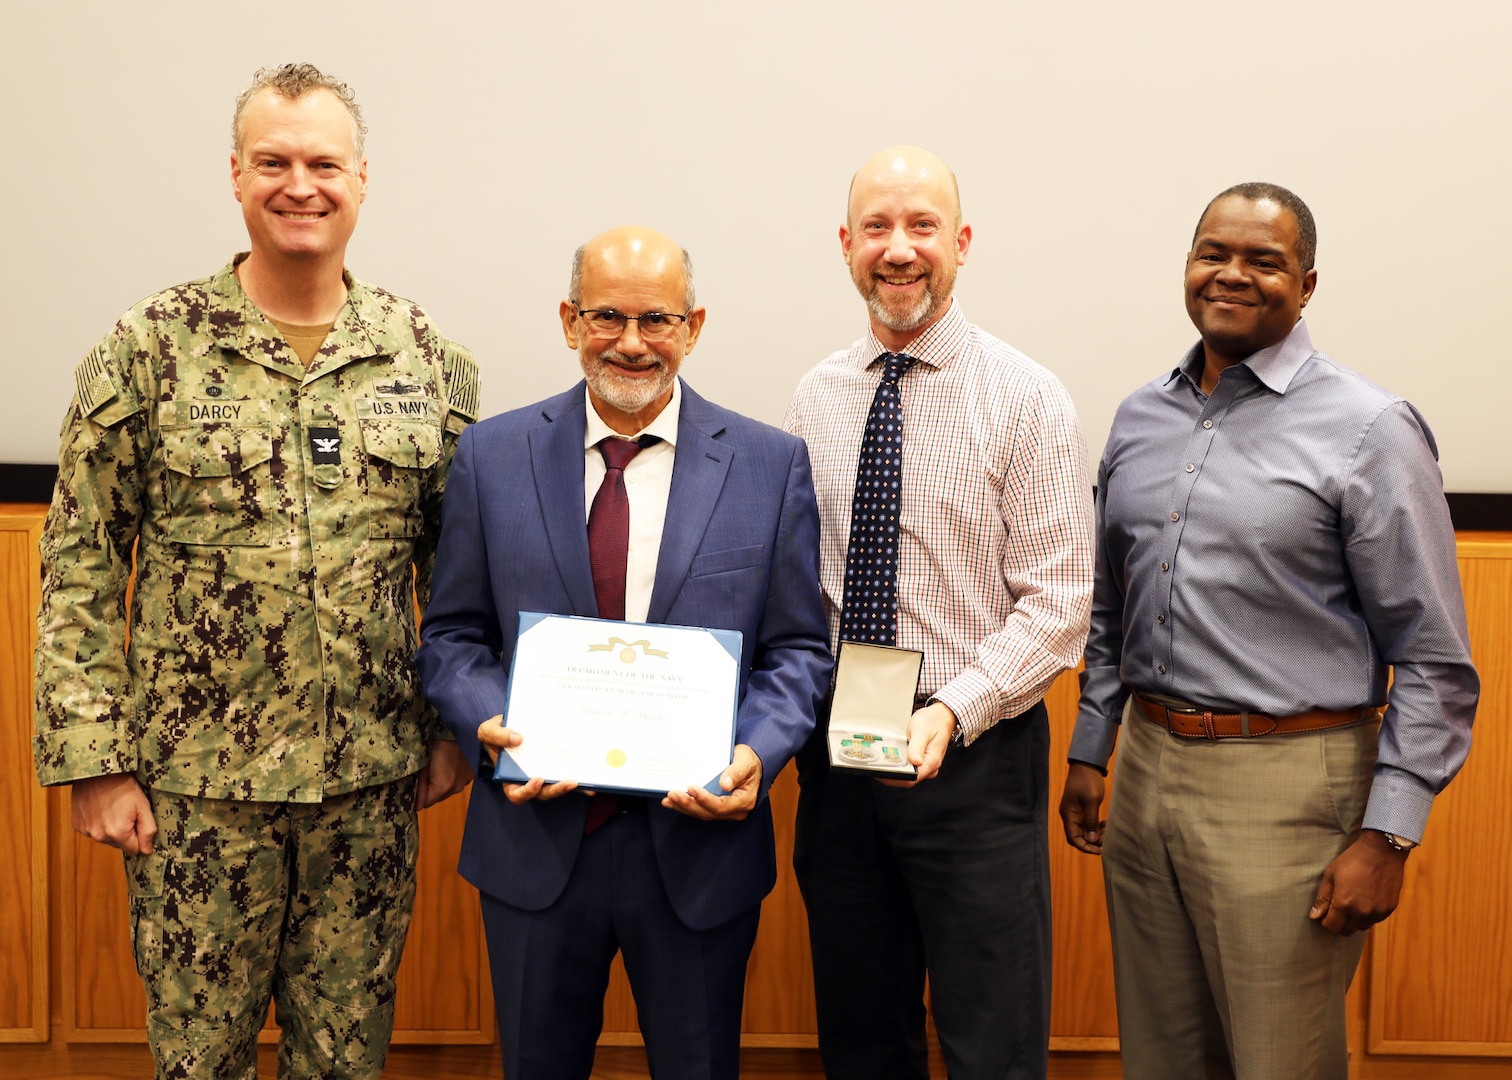 Naval Surface Warfare Center, Philadelphia Division (NSWCPD) Commanding Officer Capt. Joseph Darcy (left), Machinery Research, Logistics & Ship Integrity Department Chief Engineer (CHENG) Jeff Gosch (center right), and Technical Director (TD) Nigel C. Thijs, SES (right), present the Department of Navy (DoN) Civilian Service Achievement Medal to retired NSWCPD Branch Head Ramon “Tony” Morales (center left) who served as the keynote speaker during NSWCPD’s Hispanic Heritage Month Observance on Oct. 4, 2023. (U.S. Navy photo by Phillip Scaringi/Released)